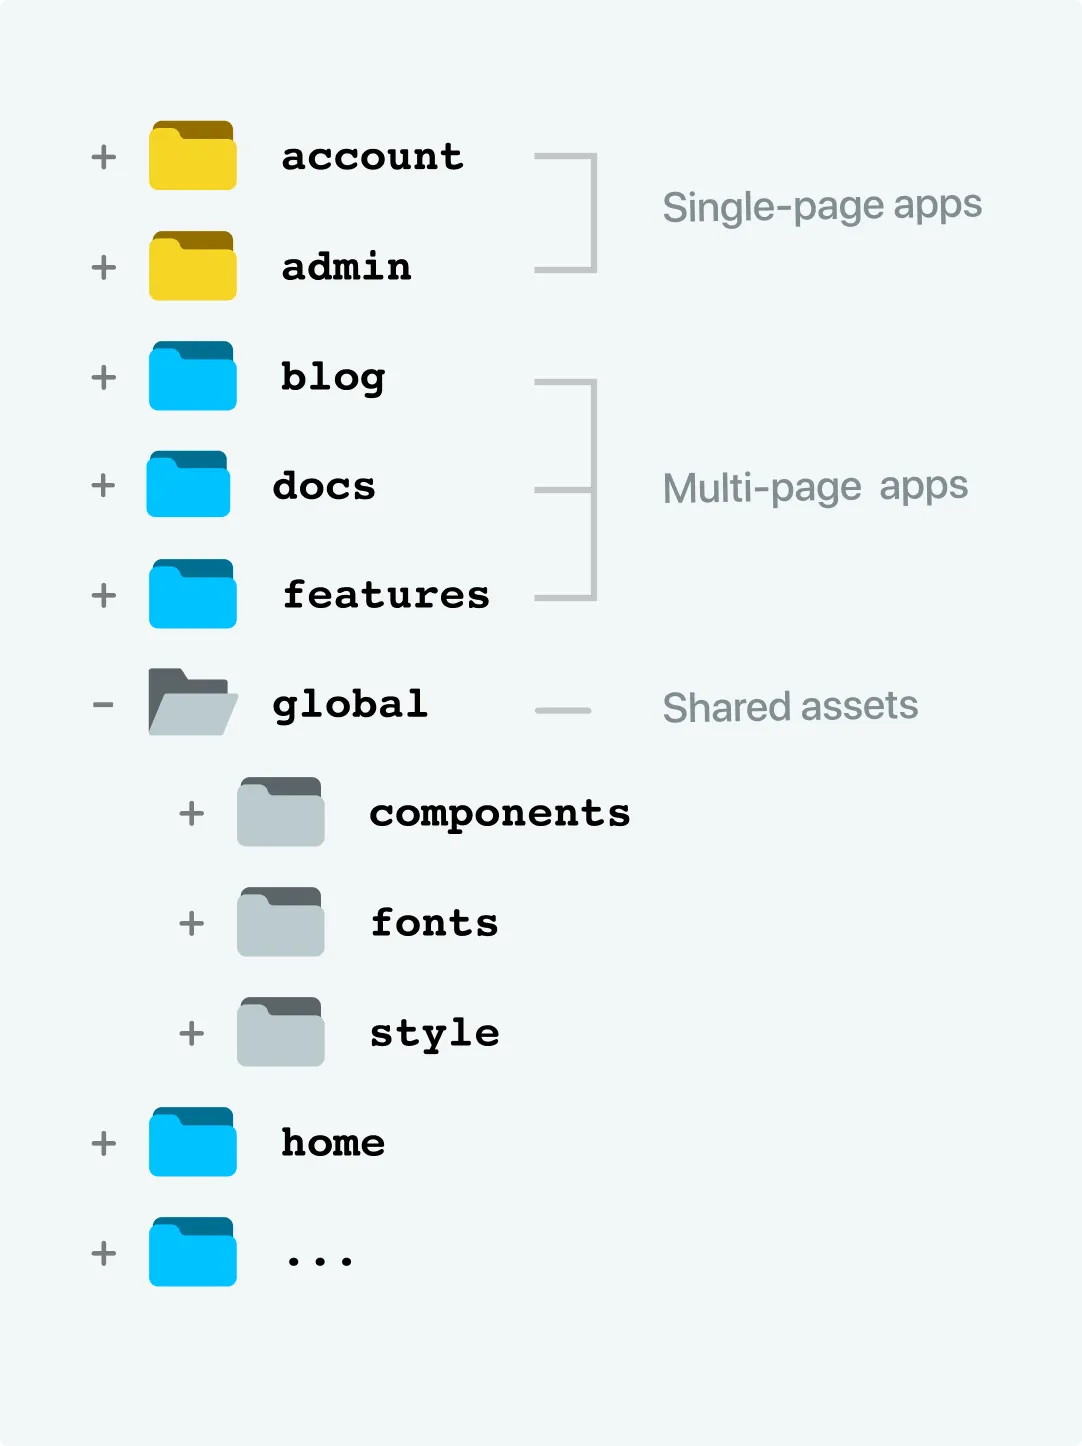 You structure your app hierarchy as you please.